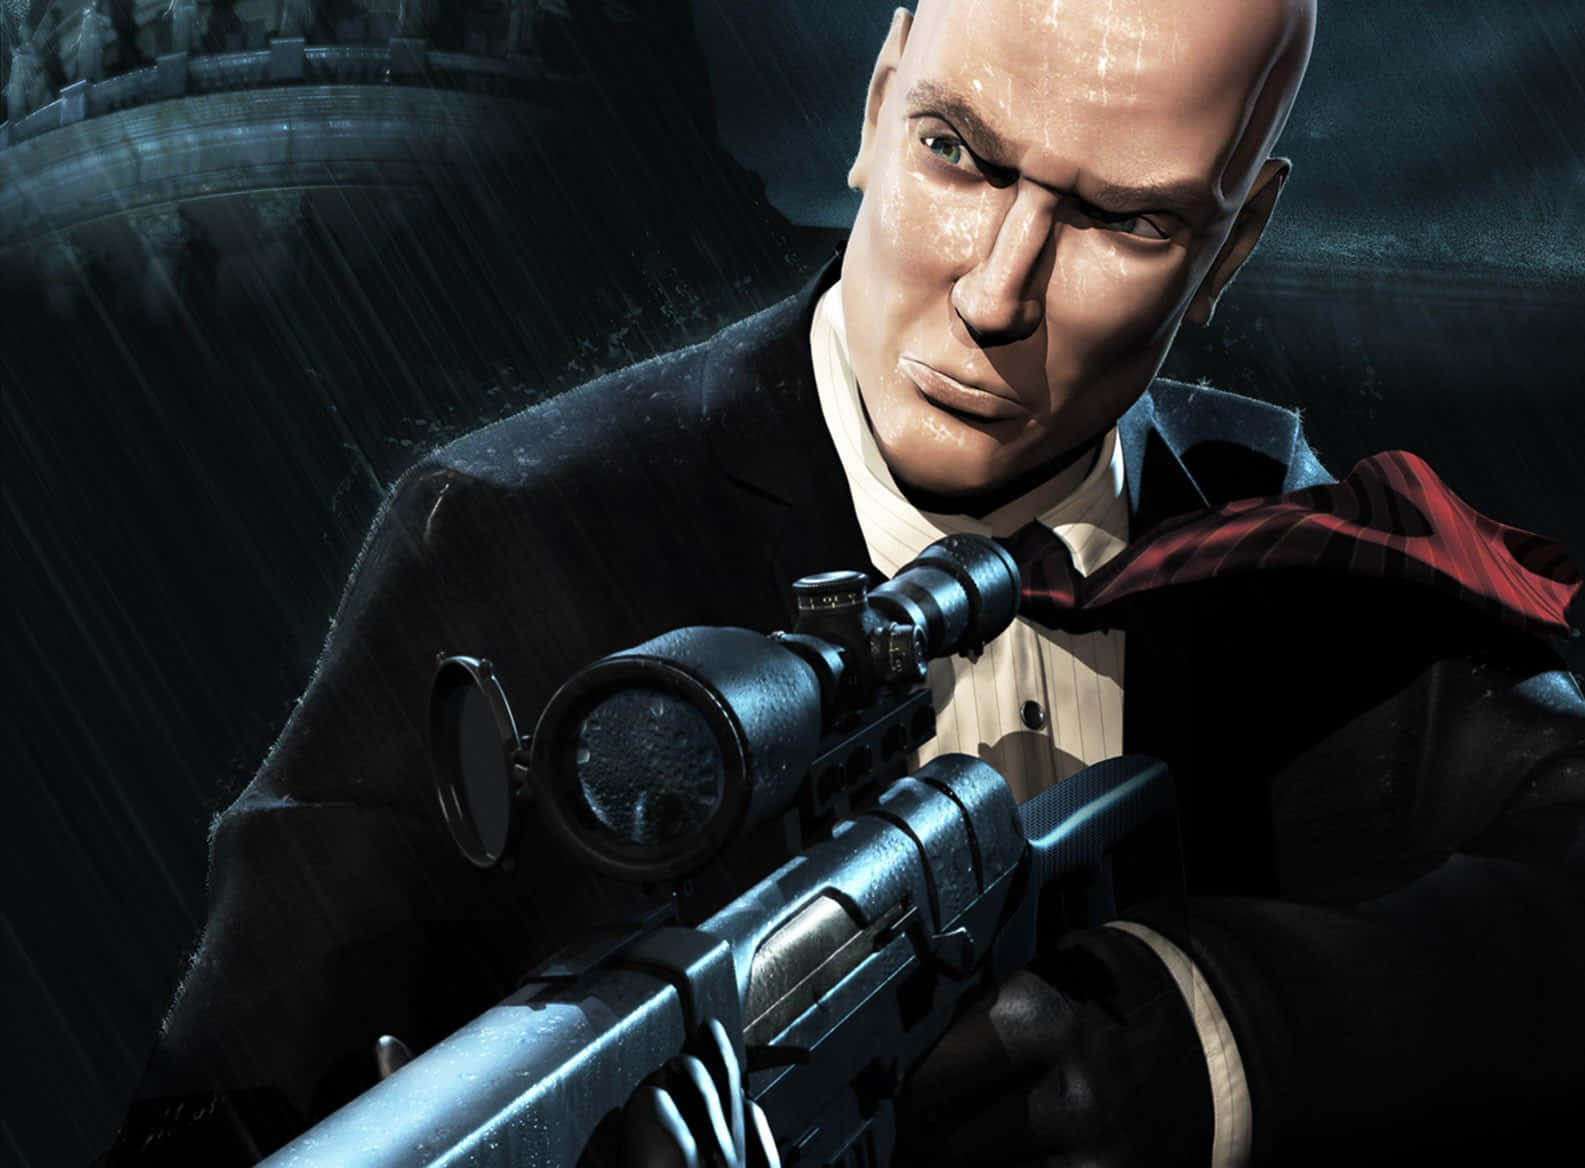 "Be the perfect assassin in Hitman 2"